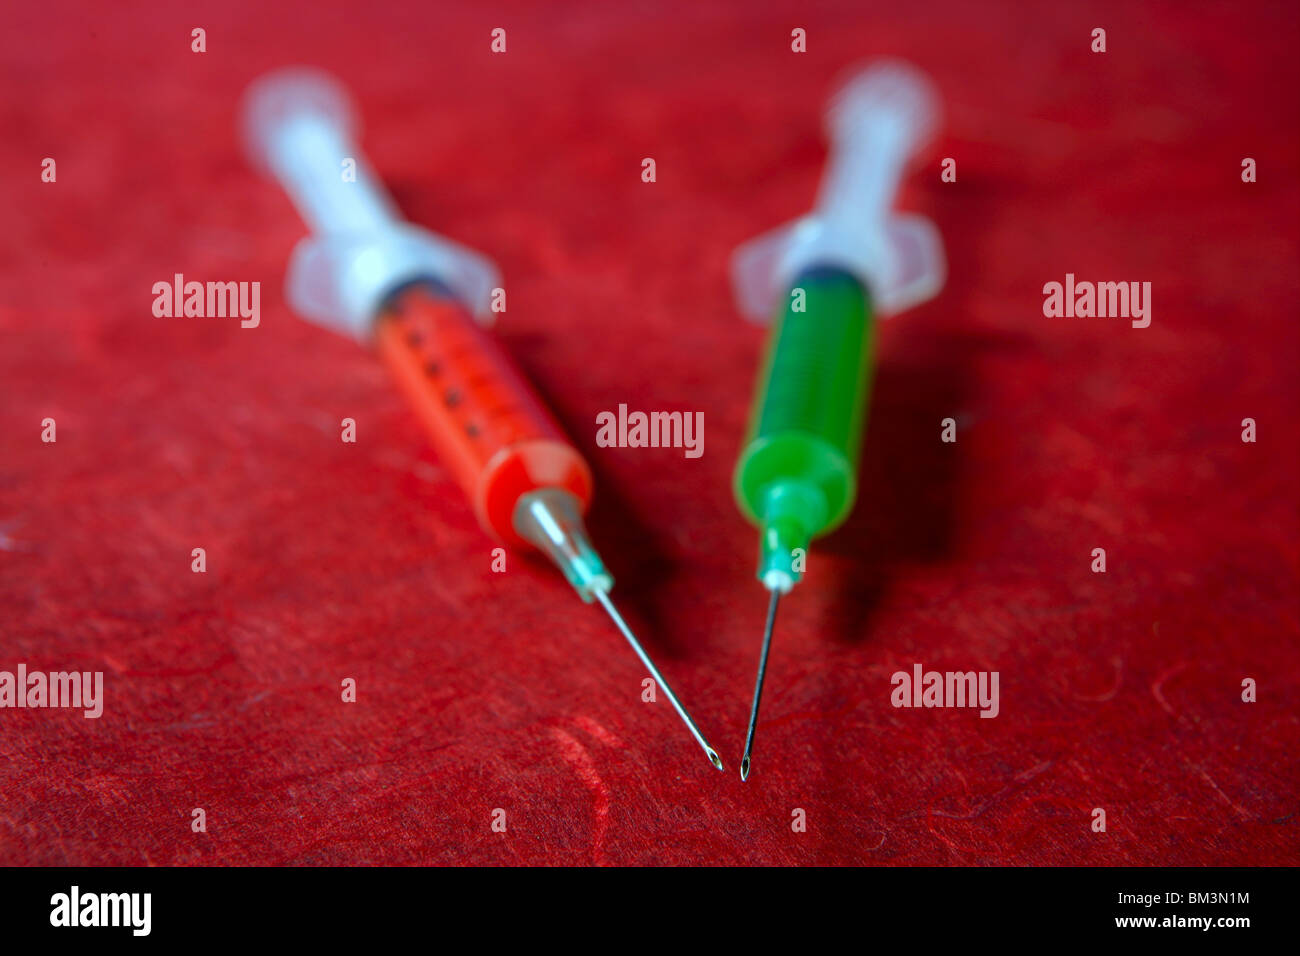 Two red and green syringe, health, addiction, medical research metaphor Stock Photo